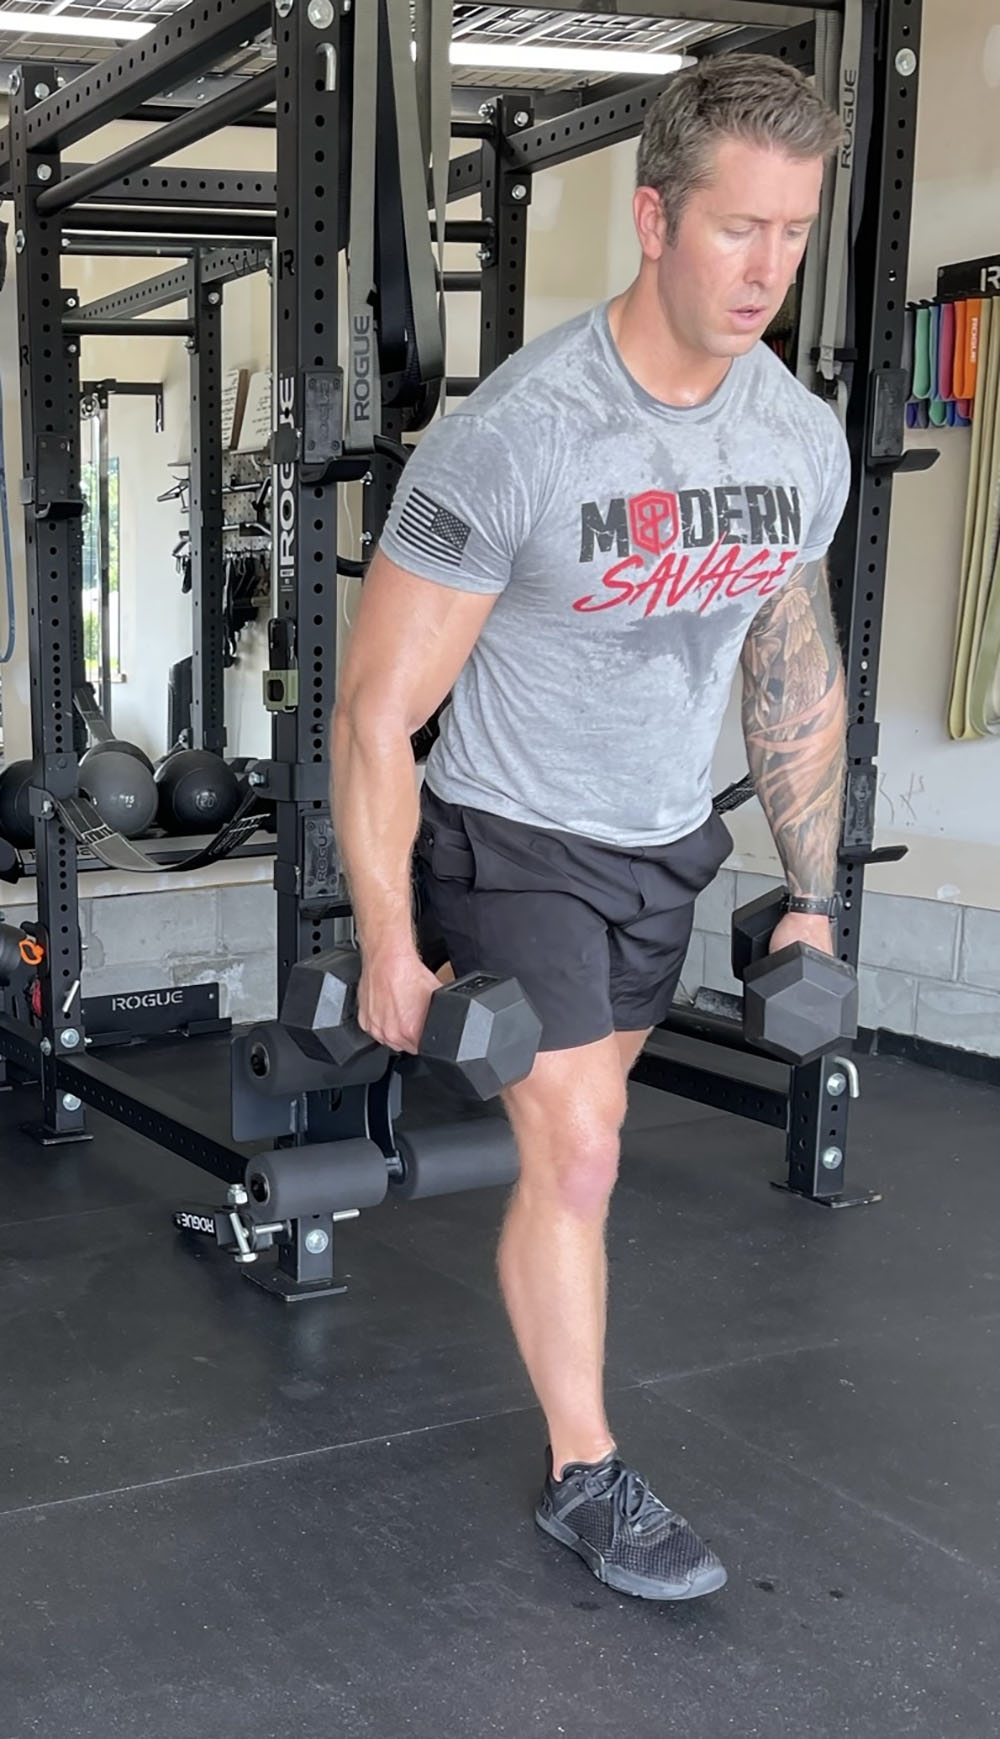 This Rack Mounted Glute Ham Developer is less bulky and lower priced than conventional GHDs. Perfect for glute workouts, ab workouts, and hamstring workouts. This image presents the Rack Mounted Glute Ham Developer being used for a leg workout.